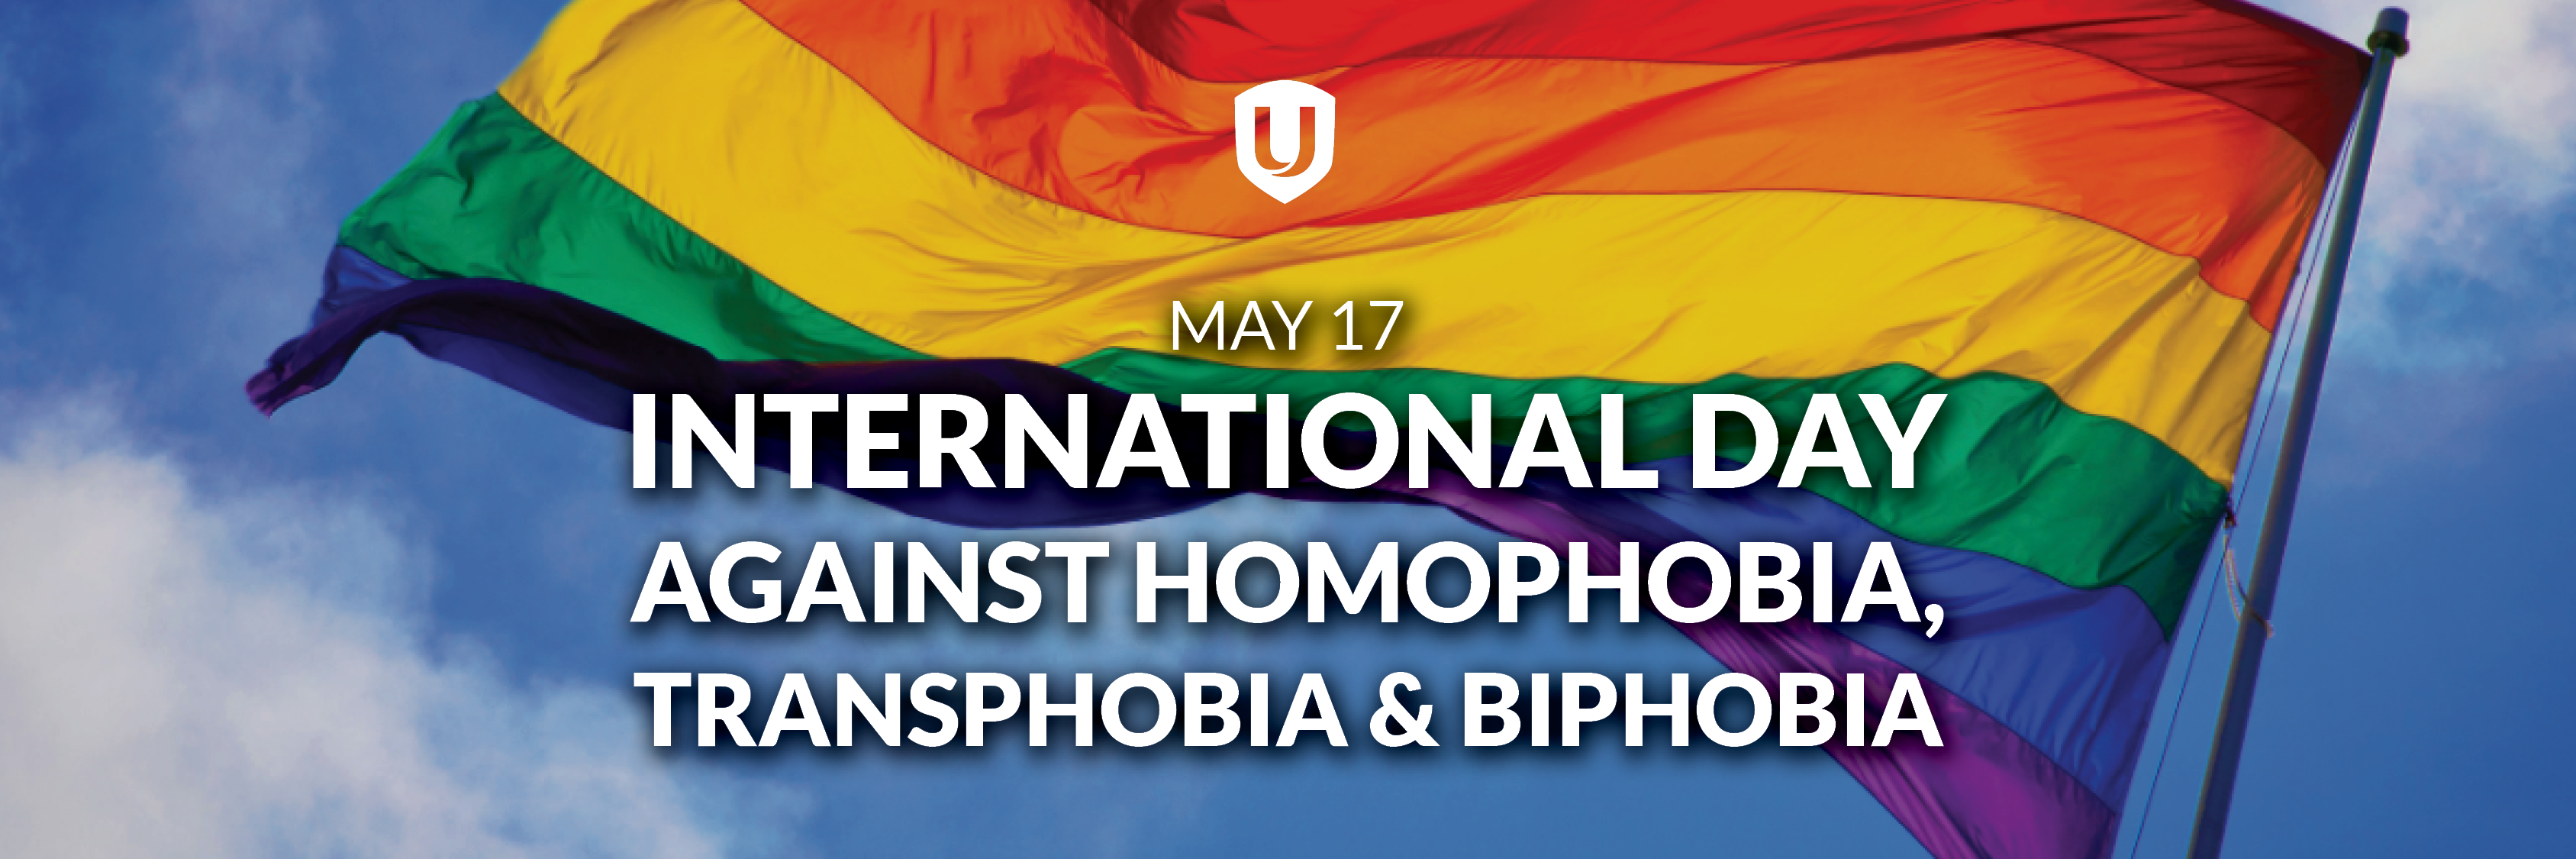 International Day Against Homophobia, Transphobia and Biphobia clouds with a pride flag